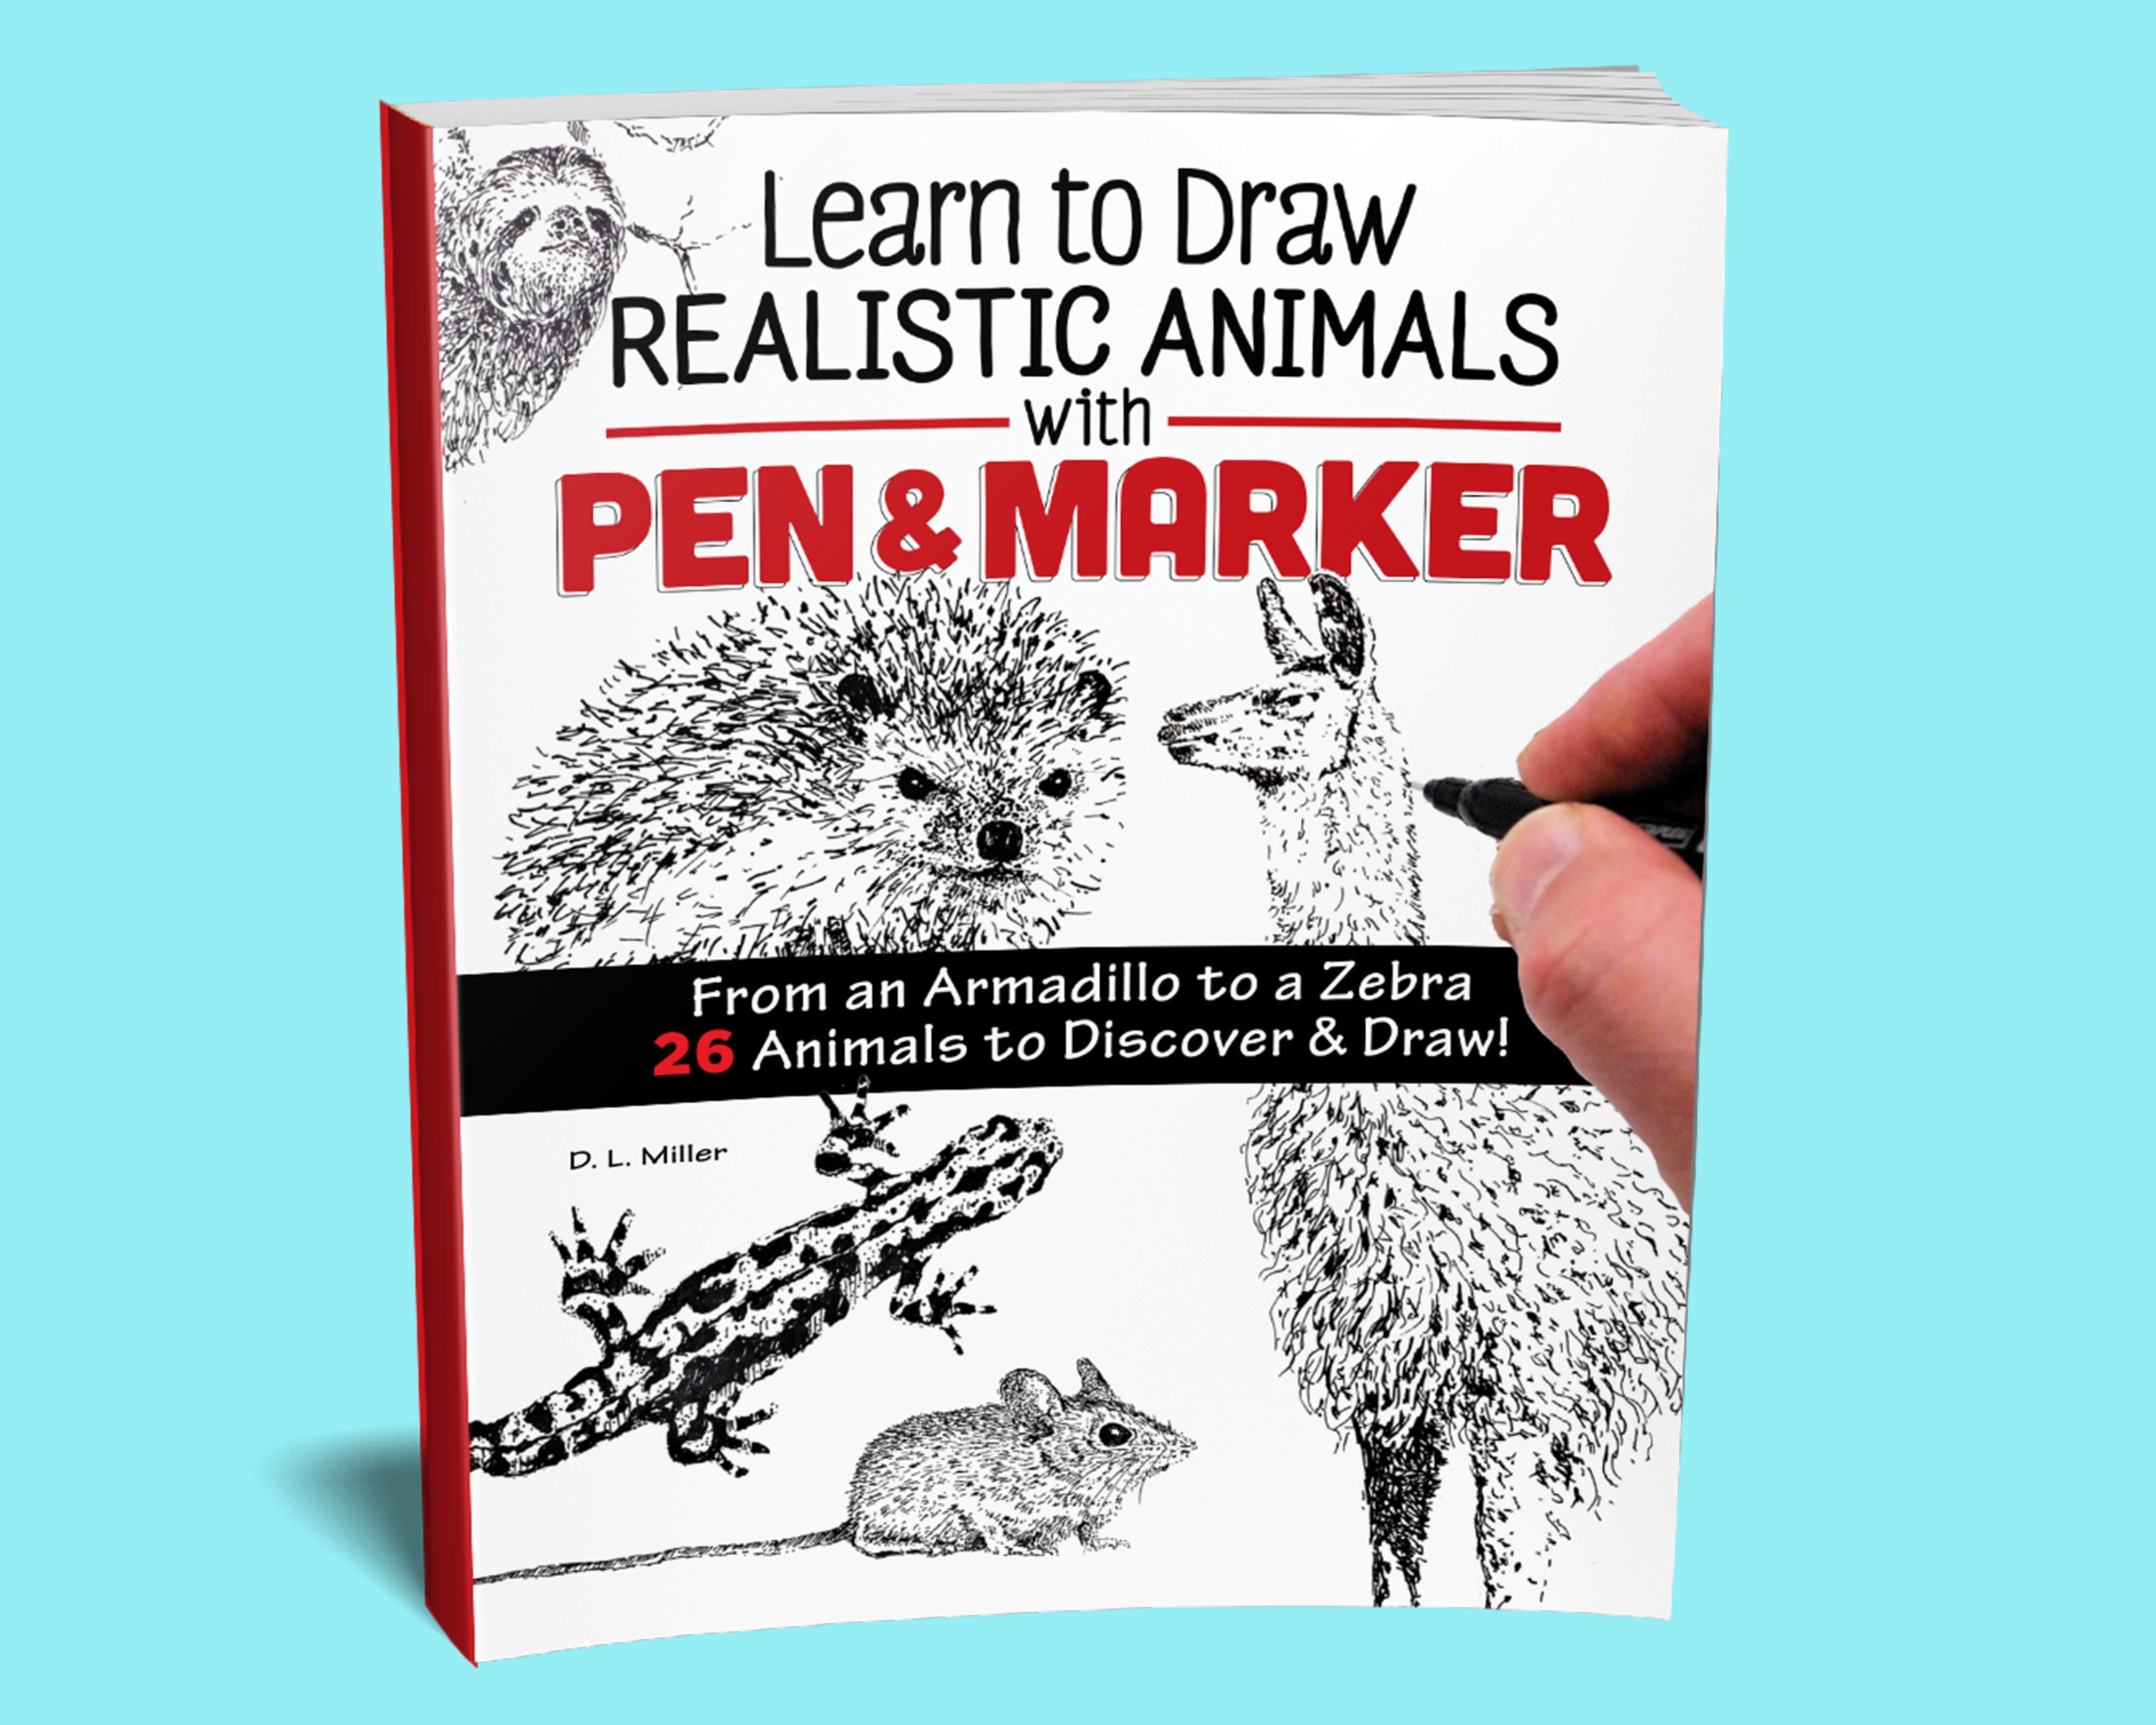 20 Easy Animals to Draw For Practice - Hobby Lesson  Easy animal drawings,  Easy drawings, Drawing tutorial